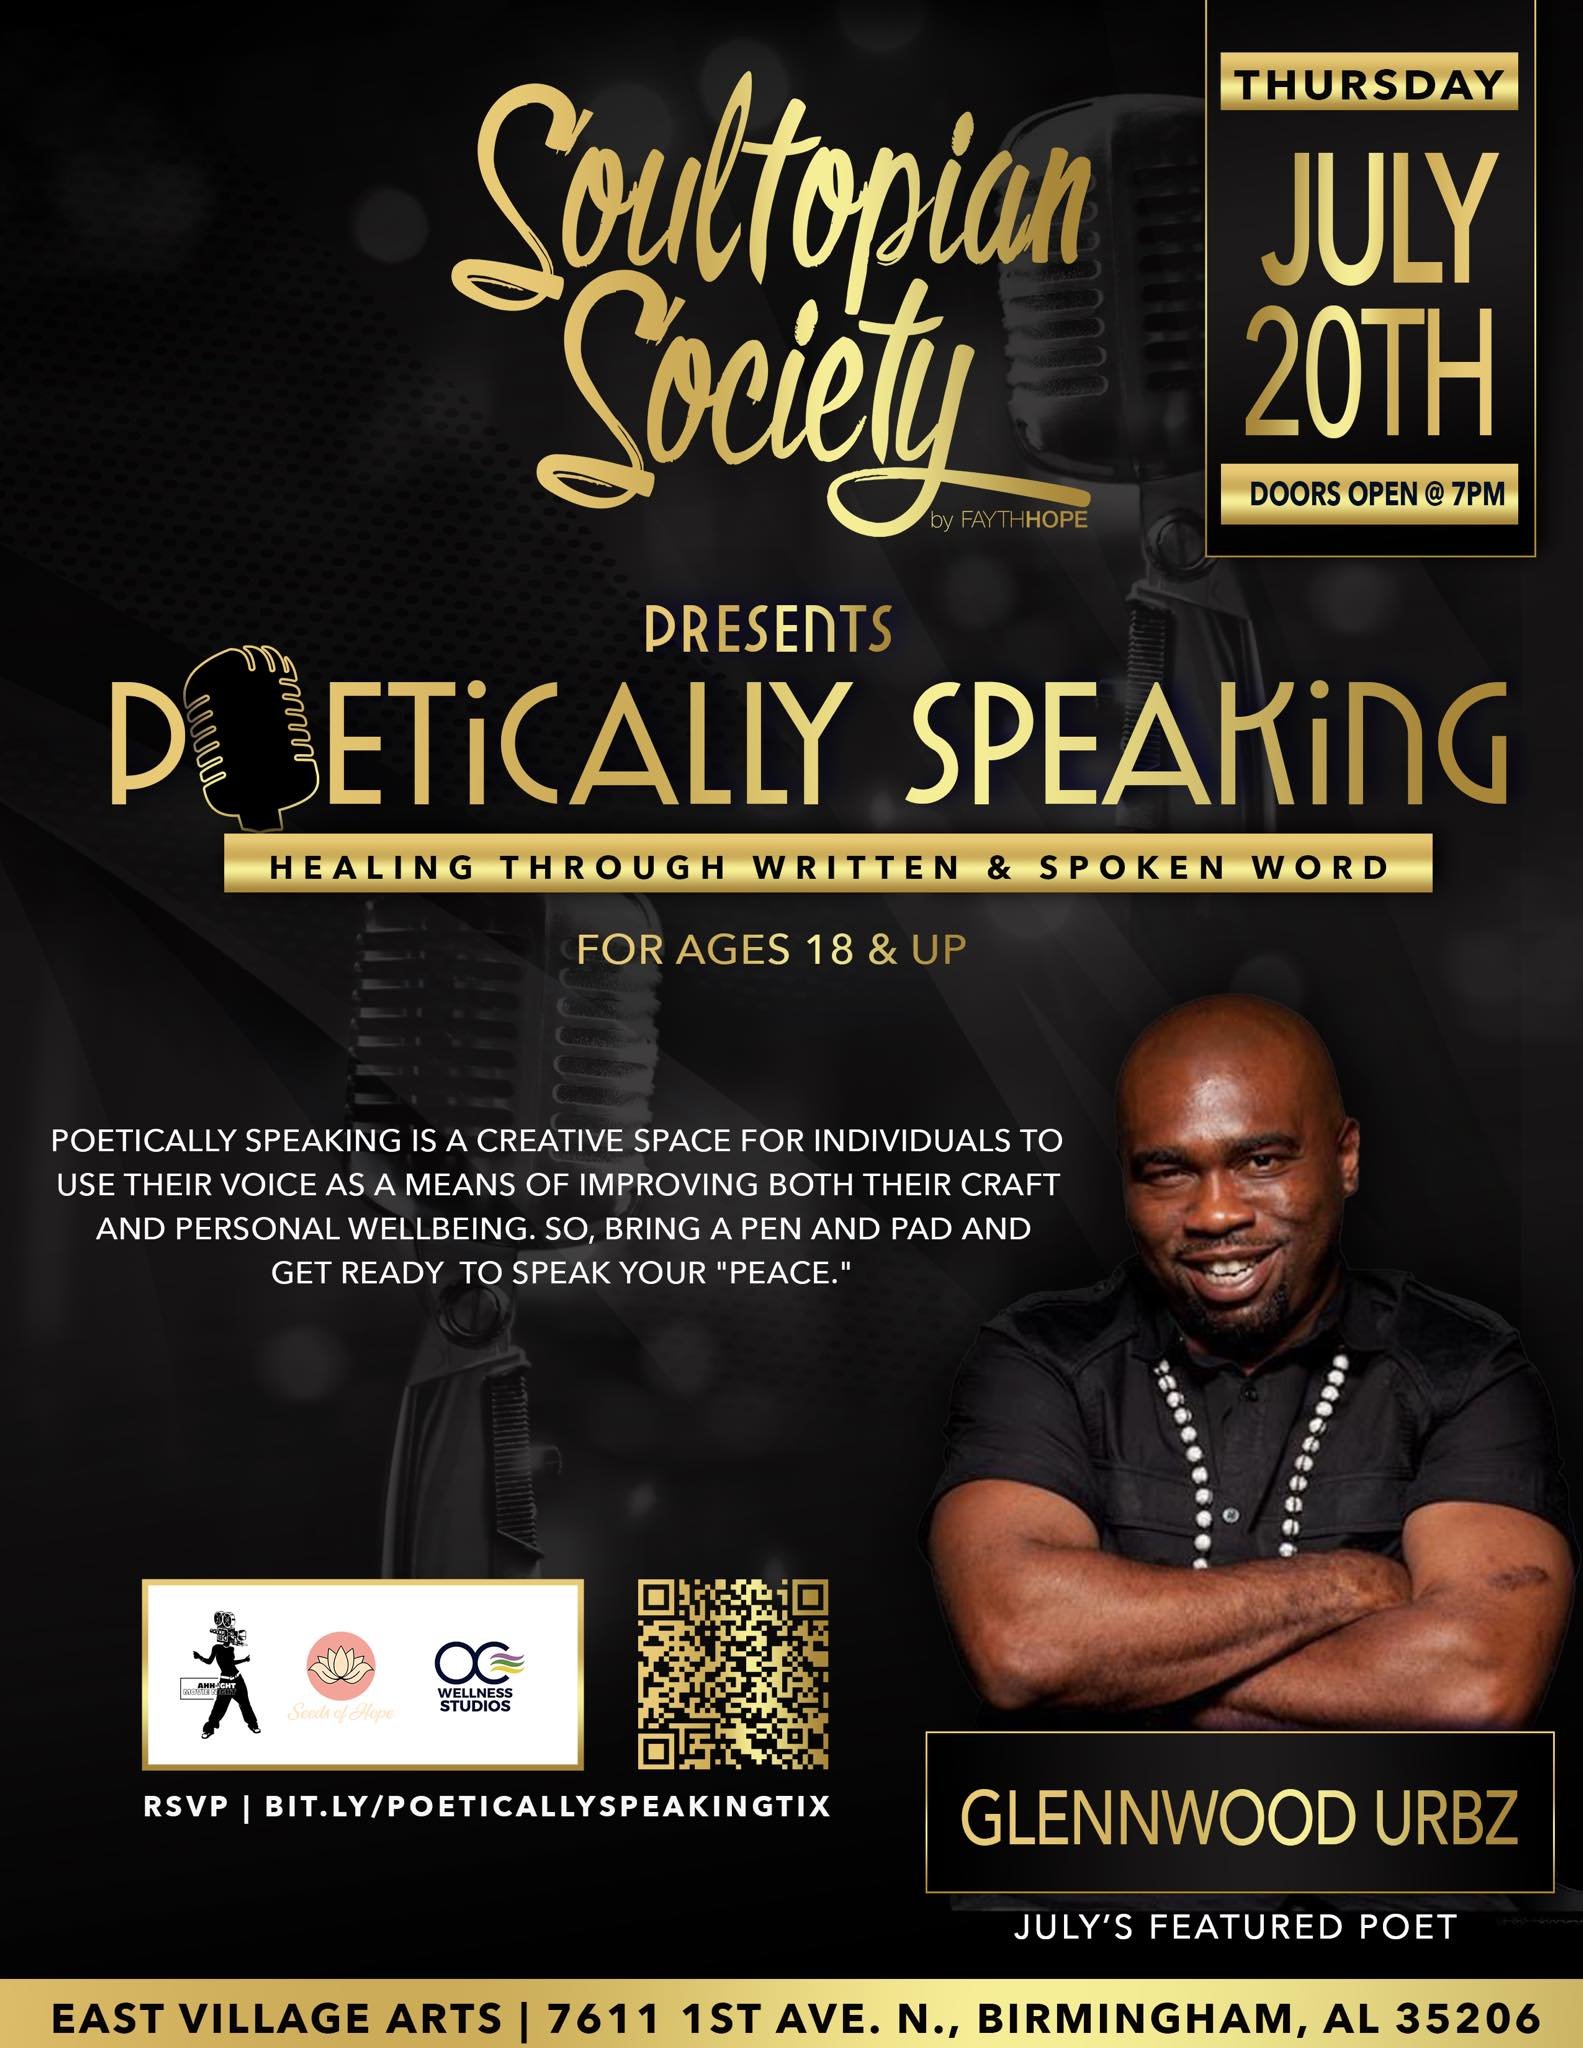 Next up on the Soultopian Society agenda&hellip;another edition of POETICALLY SPEAKING! For July, we will be featuring none other than Glennwood Urbz (The Poet)!! This event series is free, so mark your calendars for July 20th at 7pm (and every 3rd T